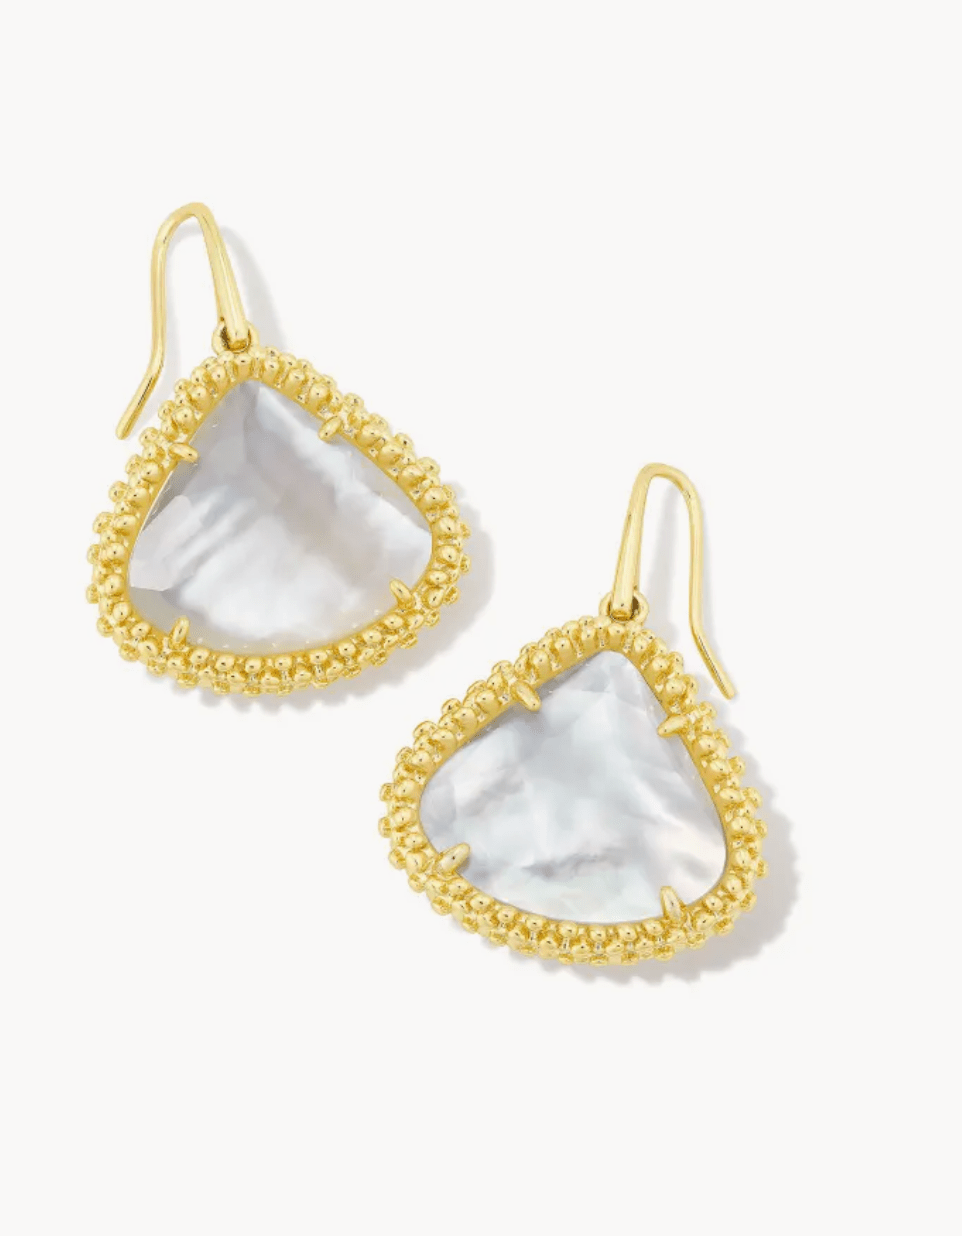 Framed Kendall Gold Large Drop Earrings in Ivory Mother-of-Pearl - Findlay Rowe Designs